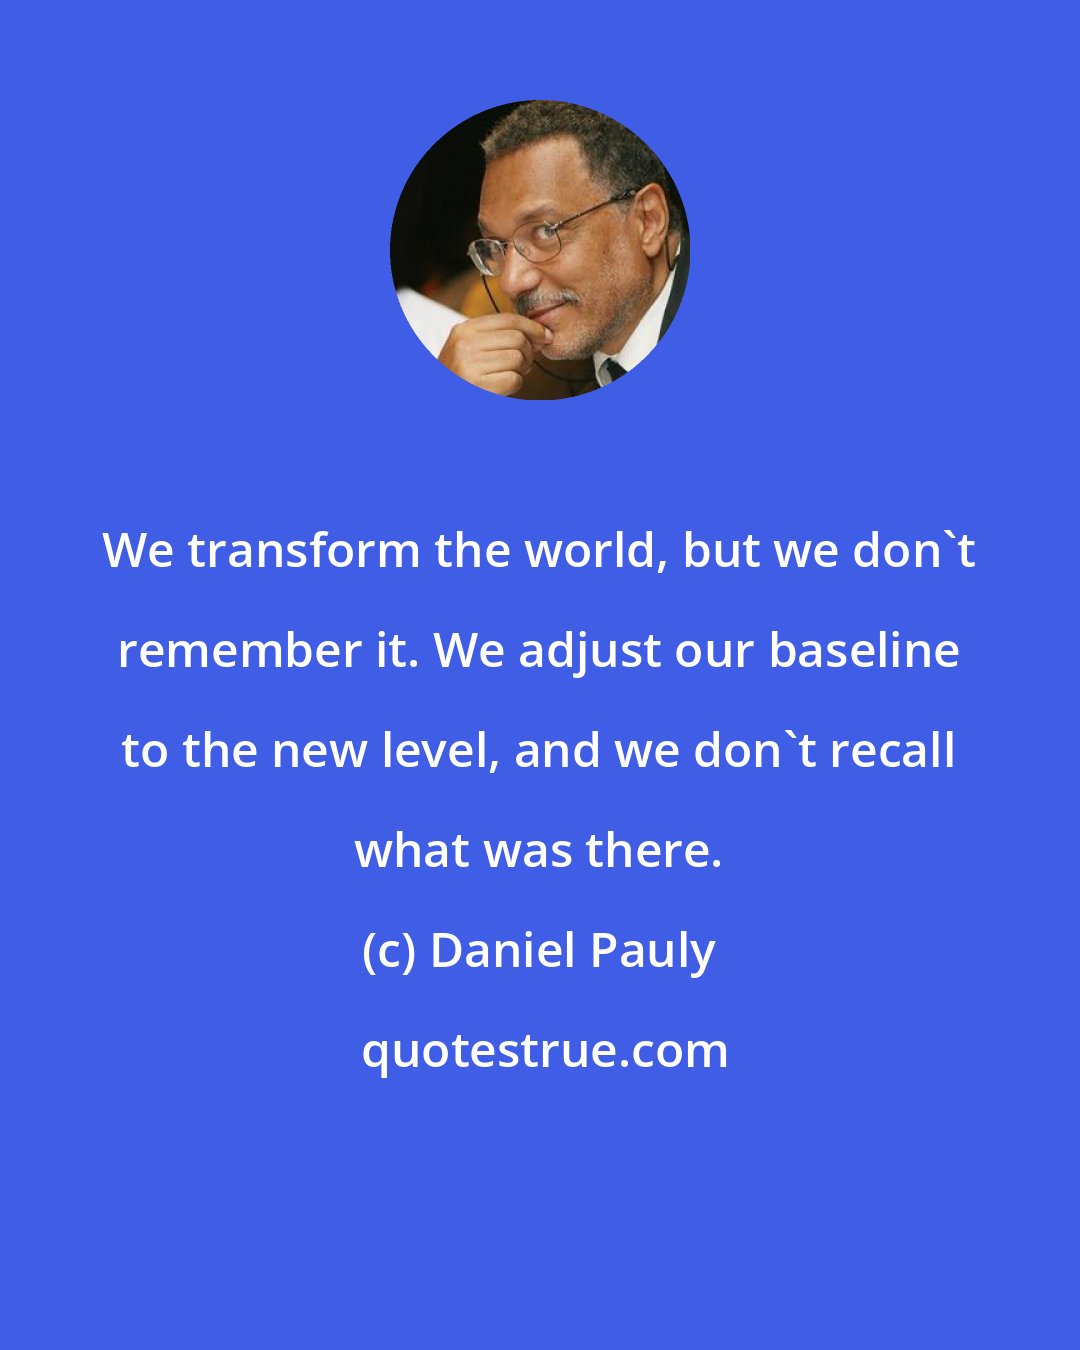 Daniel Pauly: We transform the world, but we don't remember it. We adjust our baseline to the new level, and we don't recall what was there.